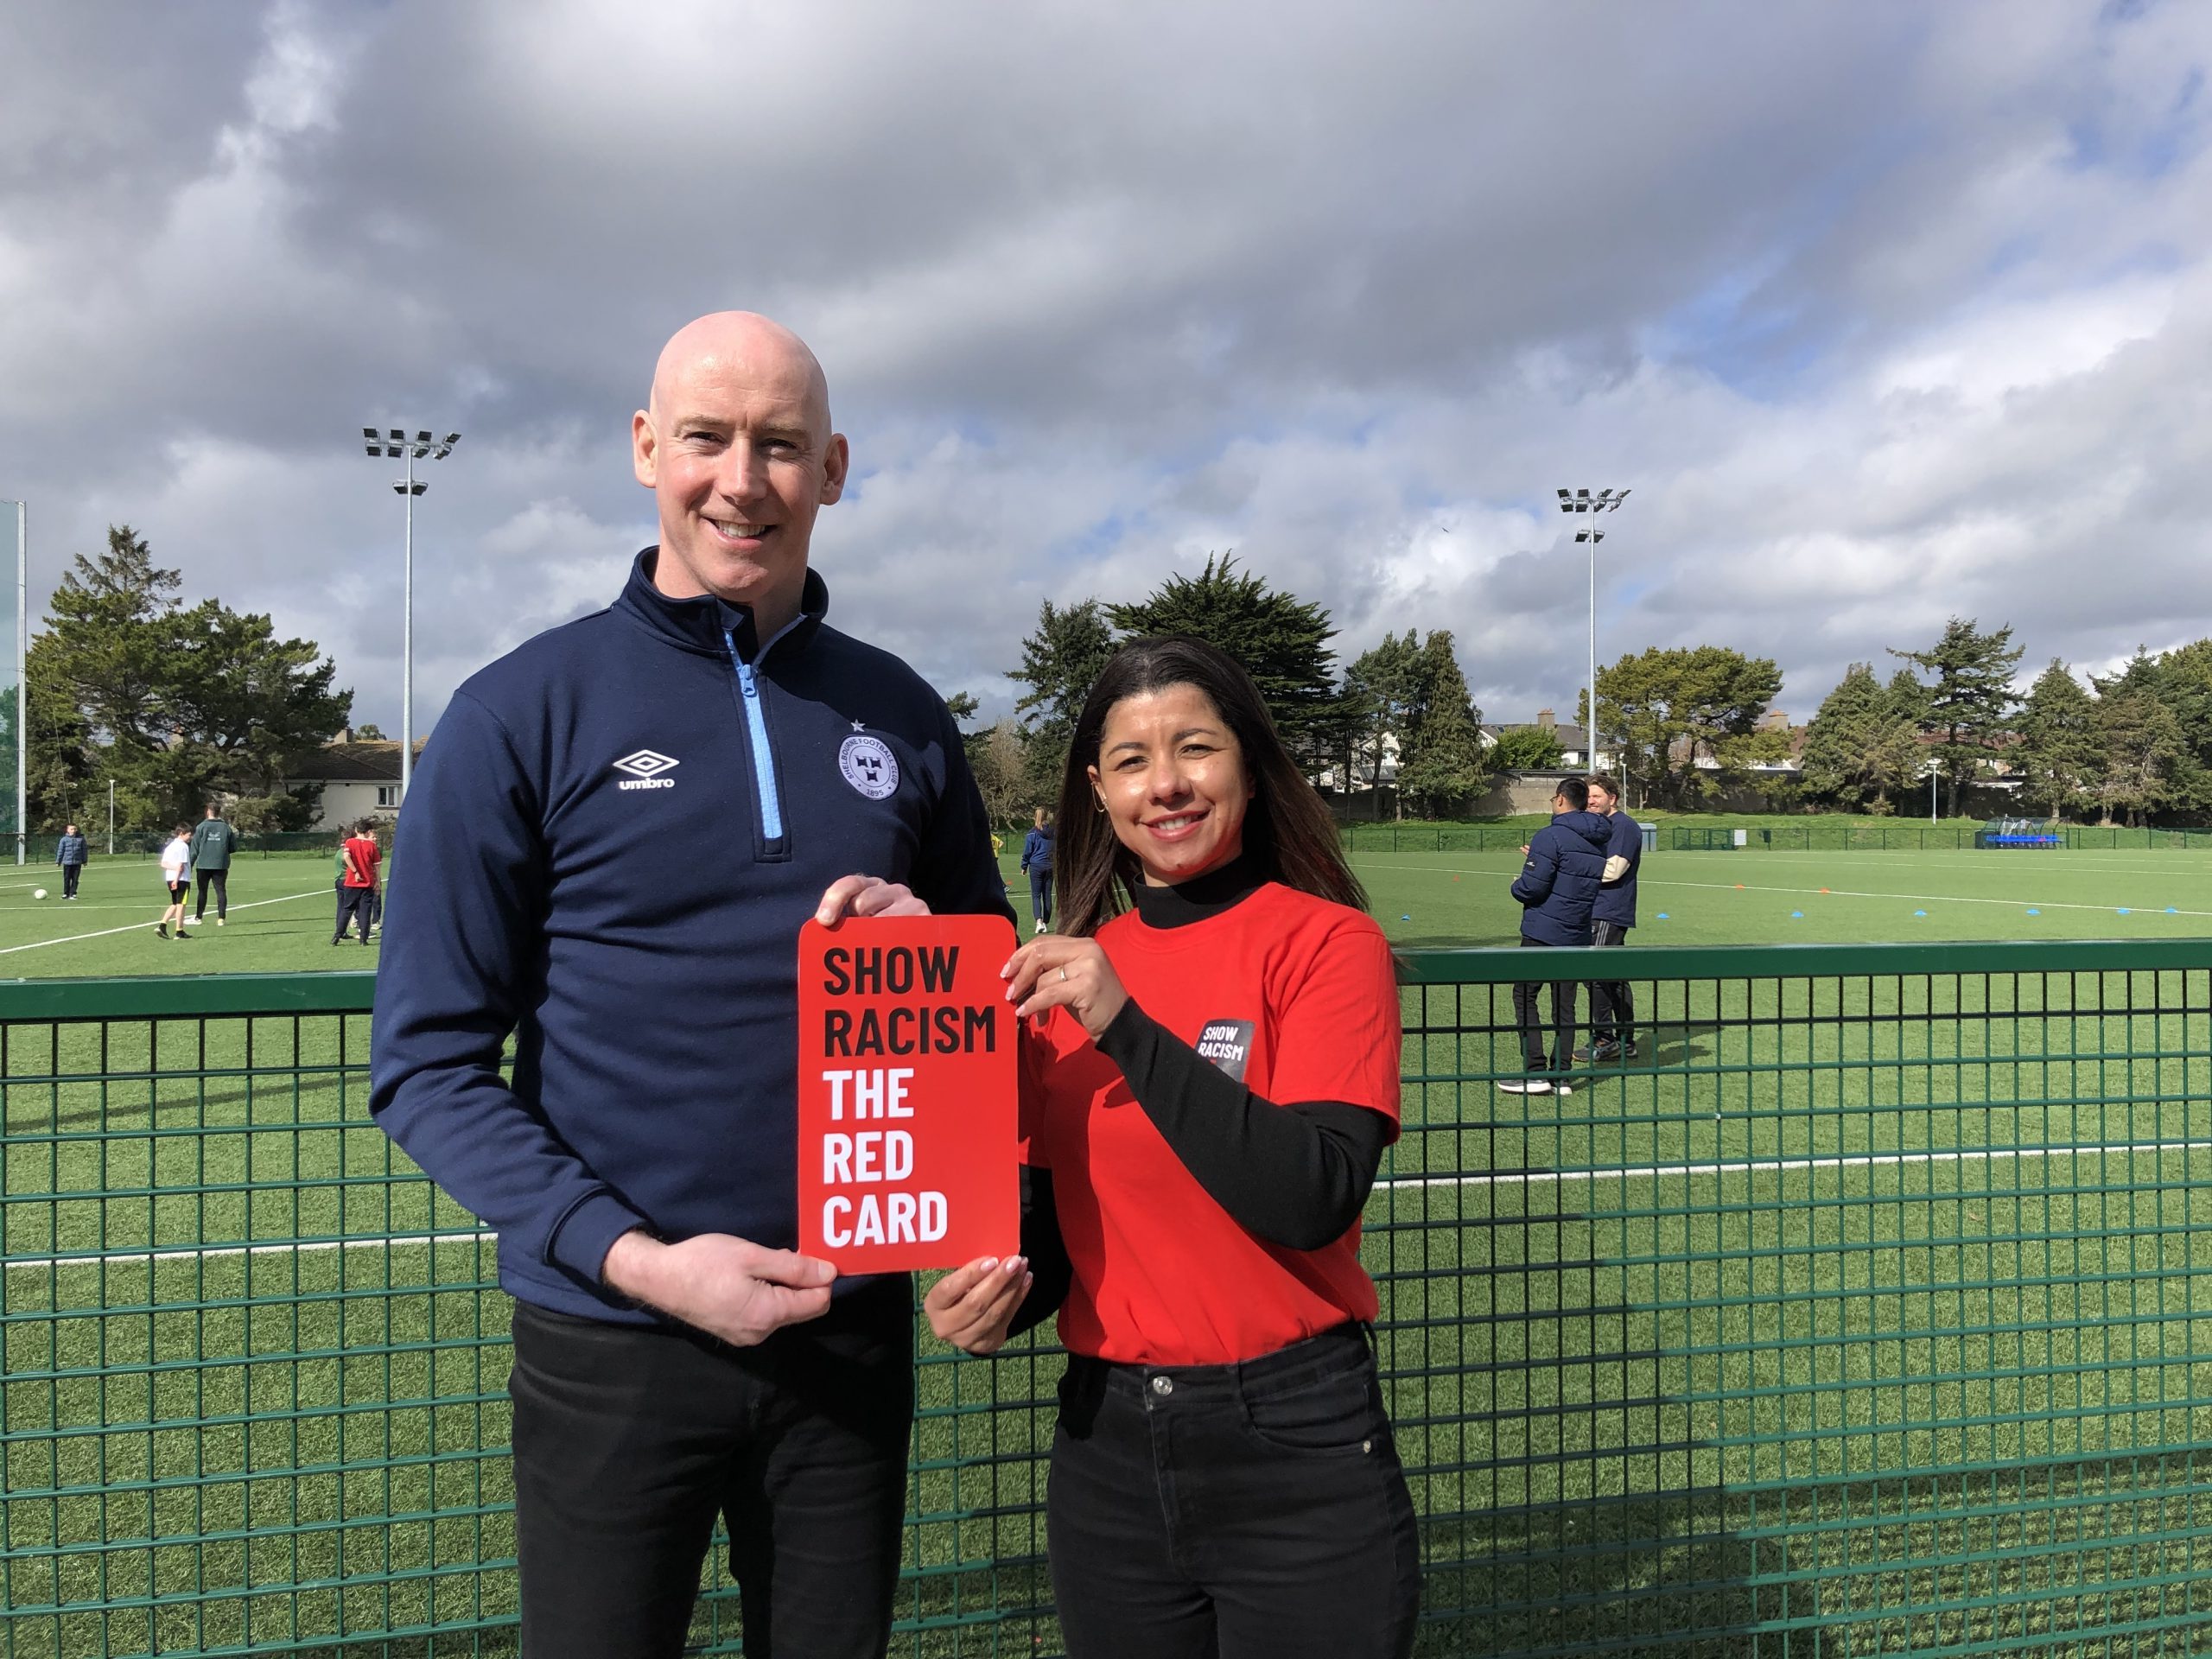 Reds Together: Shelbourne FC partner with Immigrant Council of Ireland